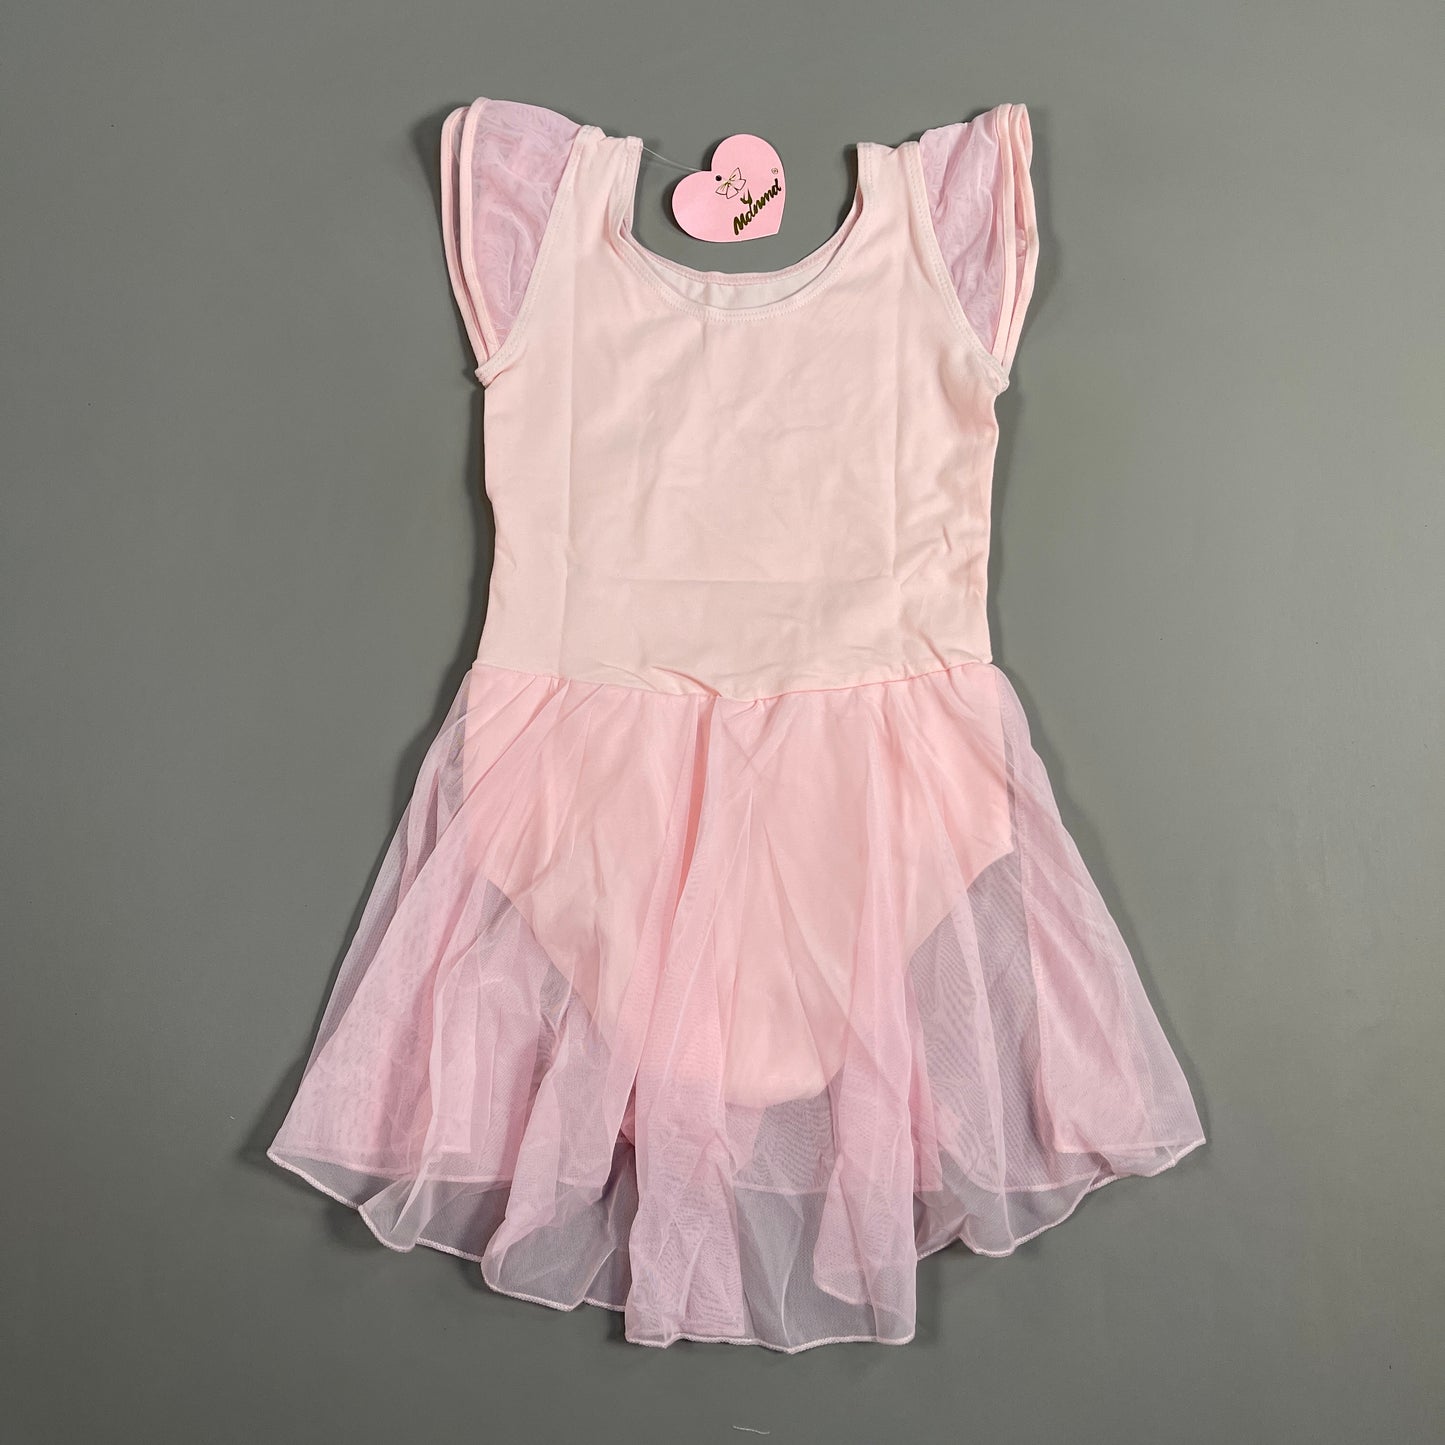 MDNMD Toddler Girls Ballet, Dance, Gymnastic, Leotard Flutter Sleeve Outfit With Skirt Sz 8 Pink (New)